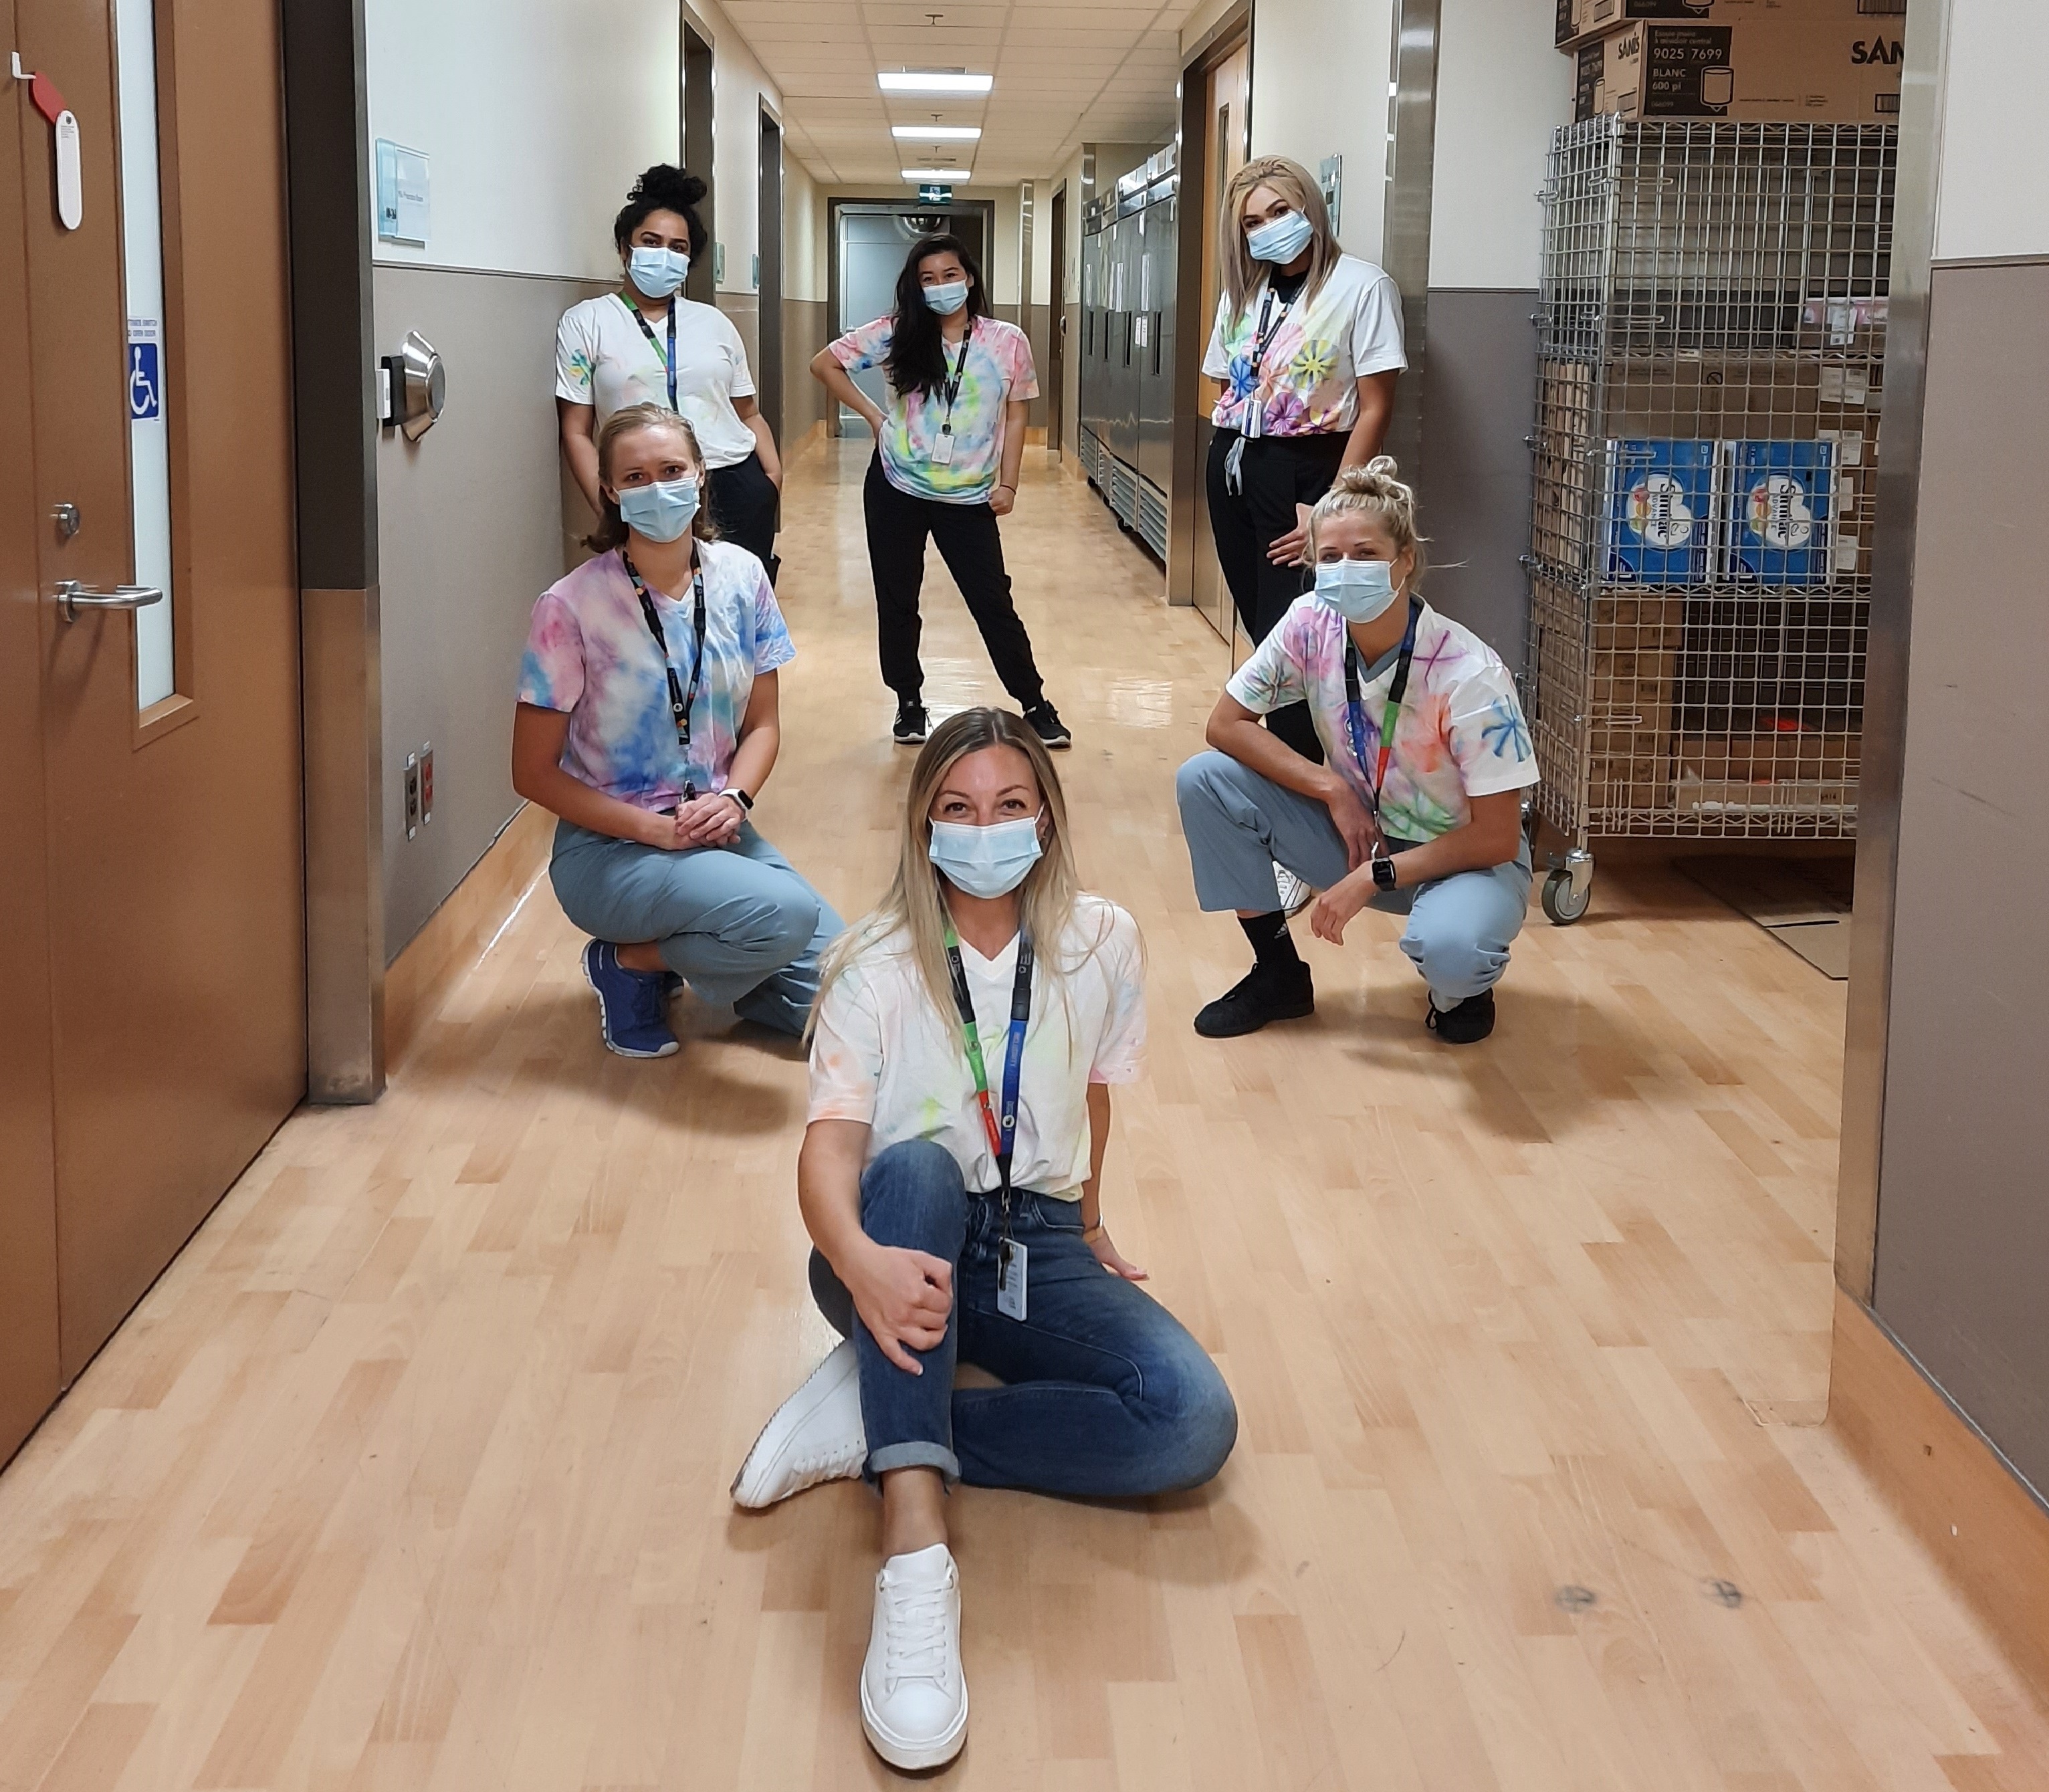 six health care employees in a hospital hallway. They are all wearing tie-dyed shirts and medical masks, looking at the camera